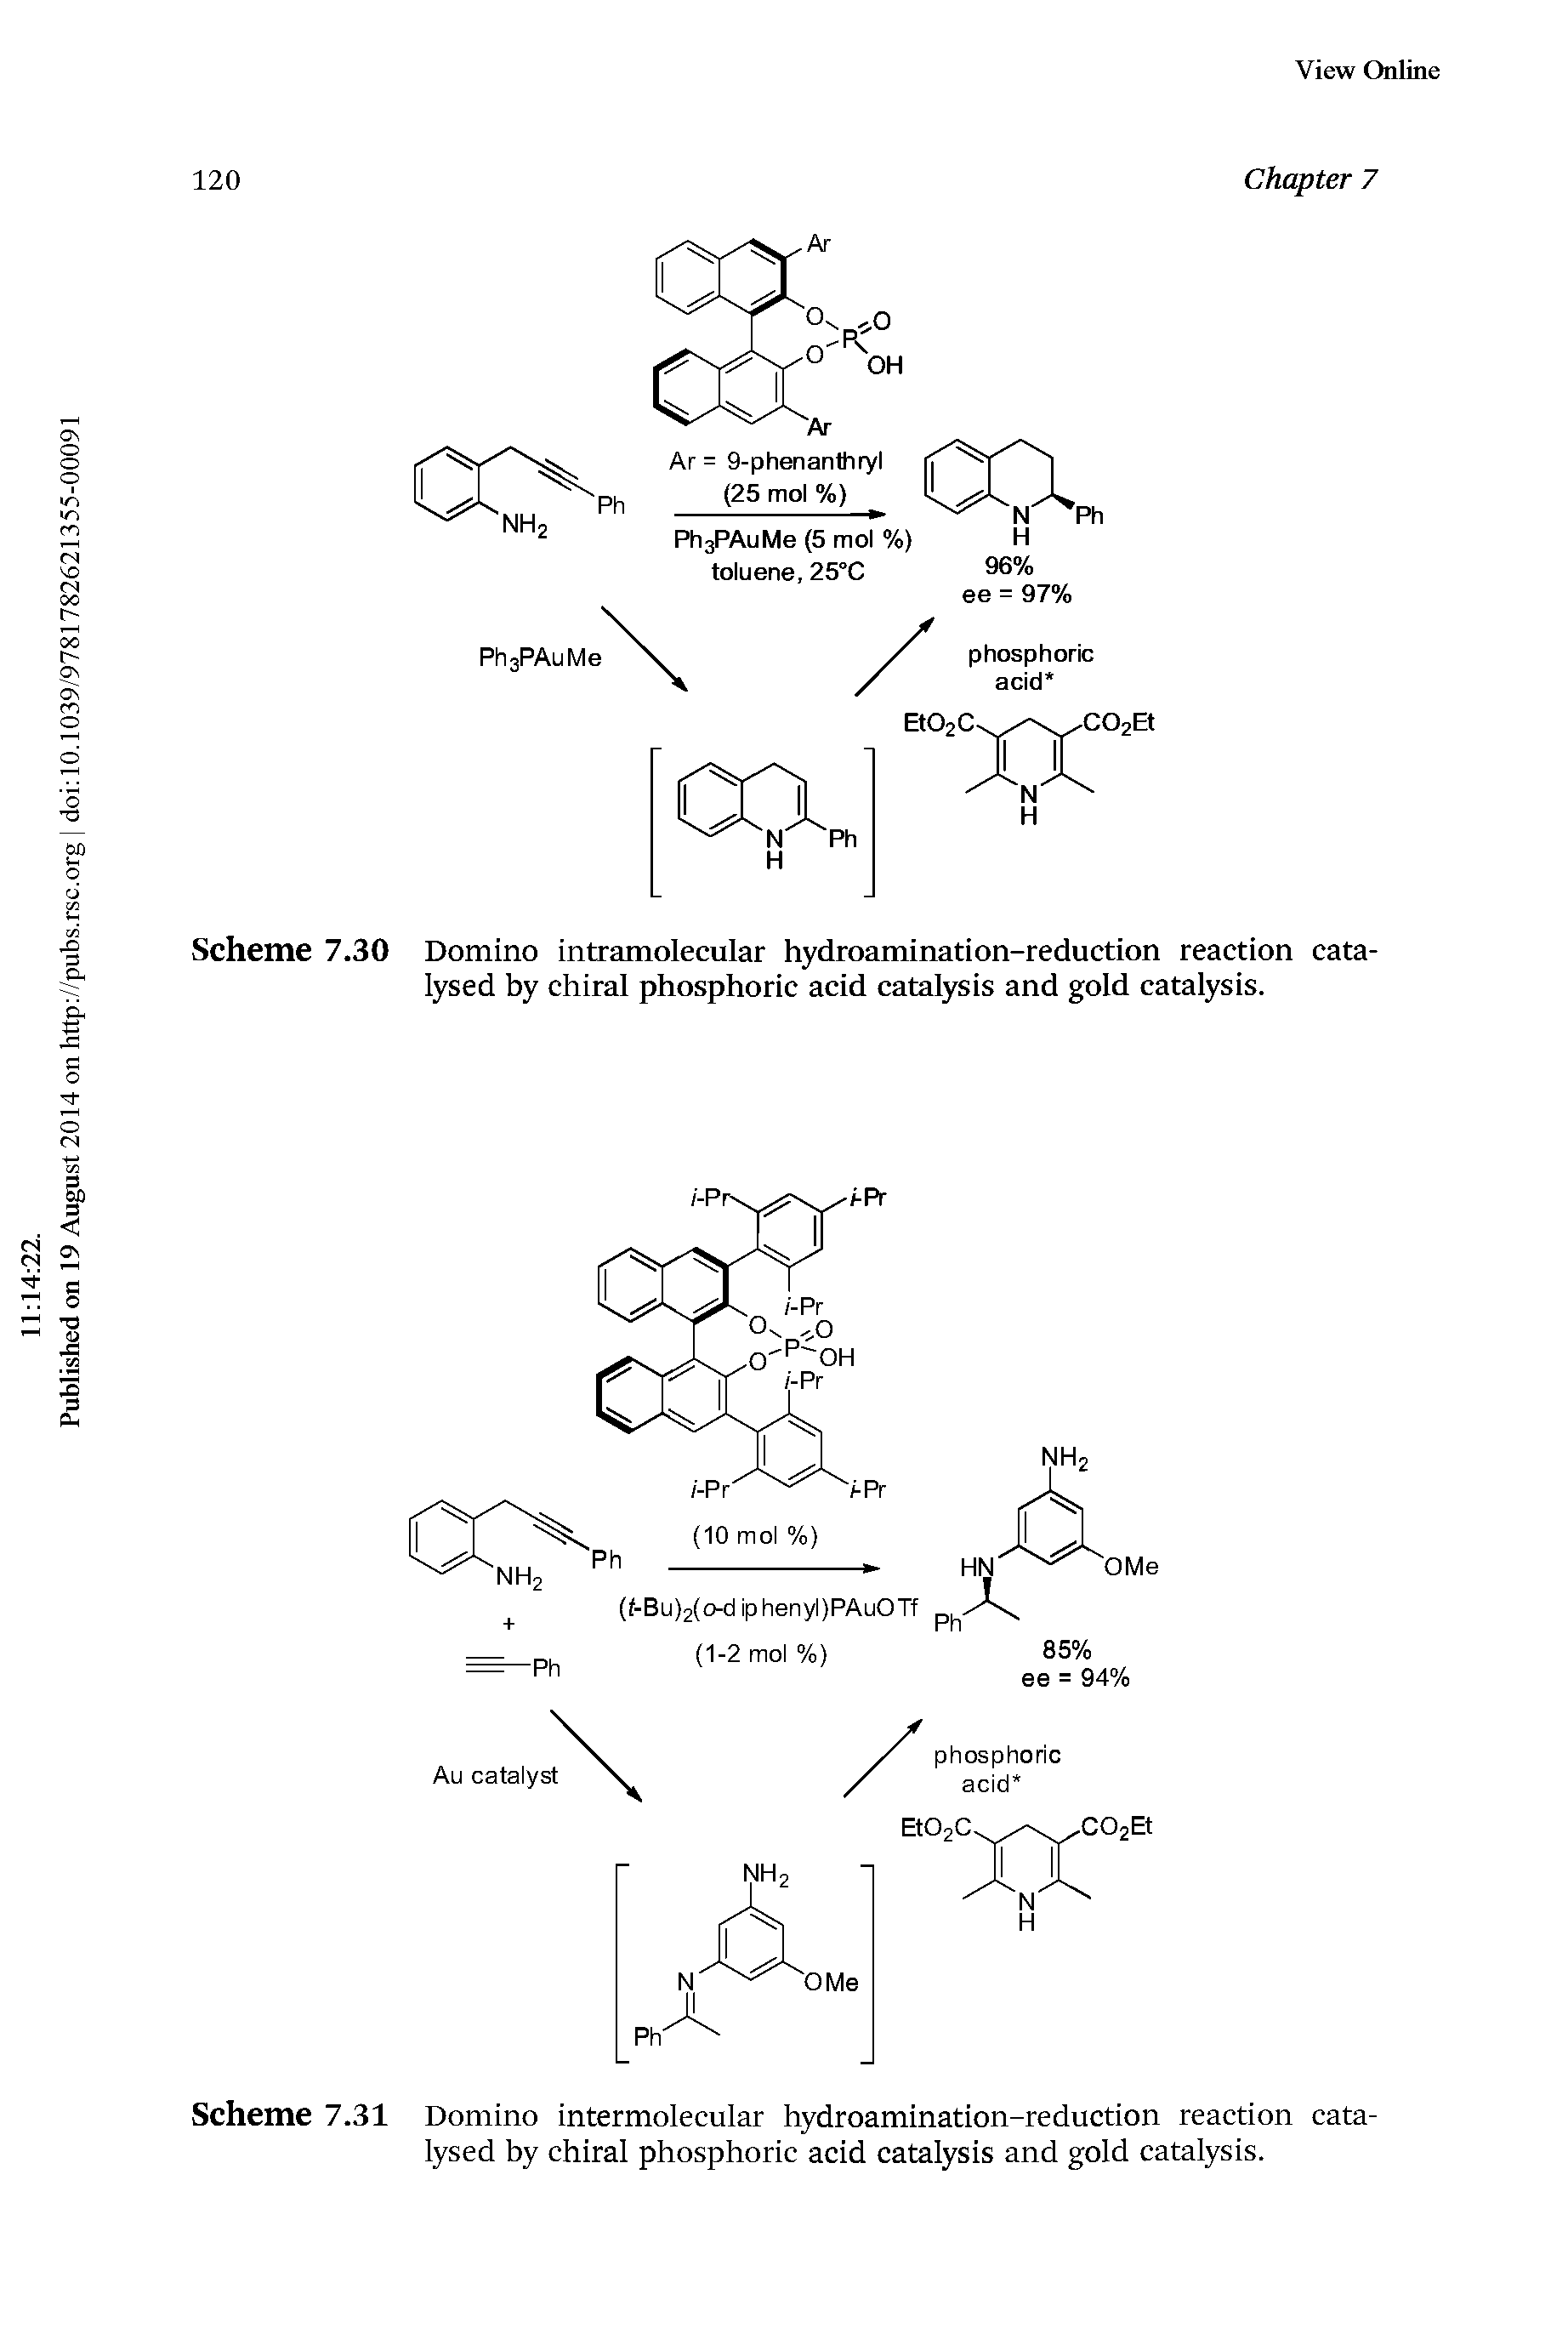 Scheme 7.31 Domino intermolecular hydroamination-reduction reaction catalysed by chiral phosphoric acid catalysis and gold catalysis.